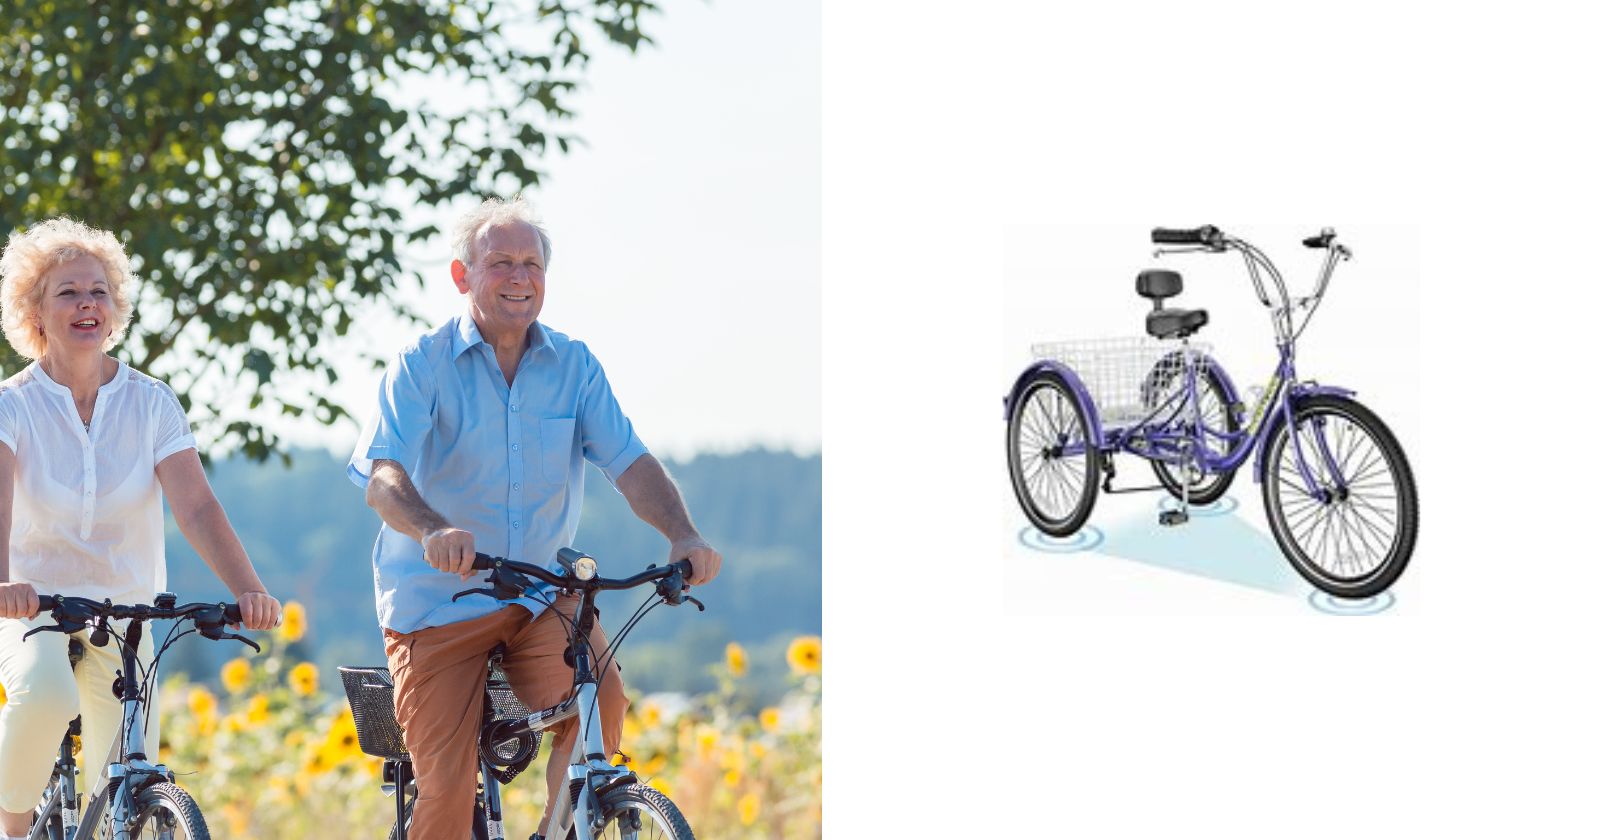 Slys Adult Tricycle Review